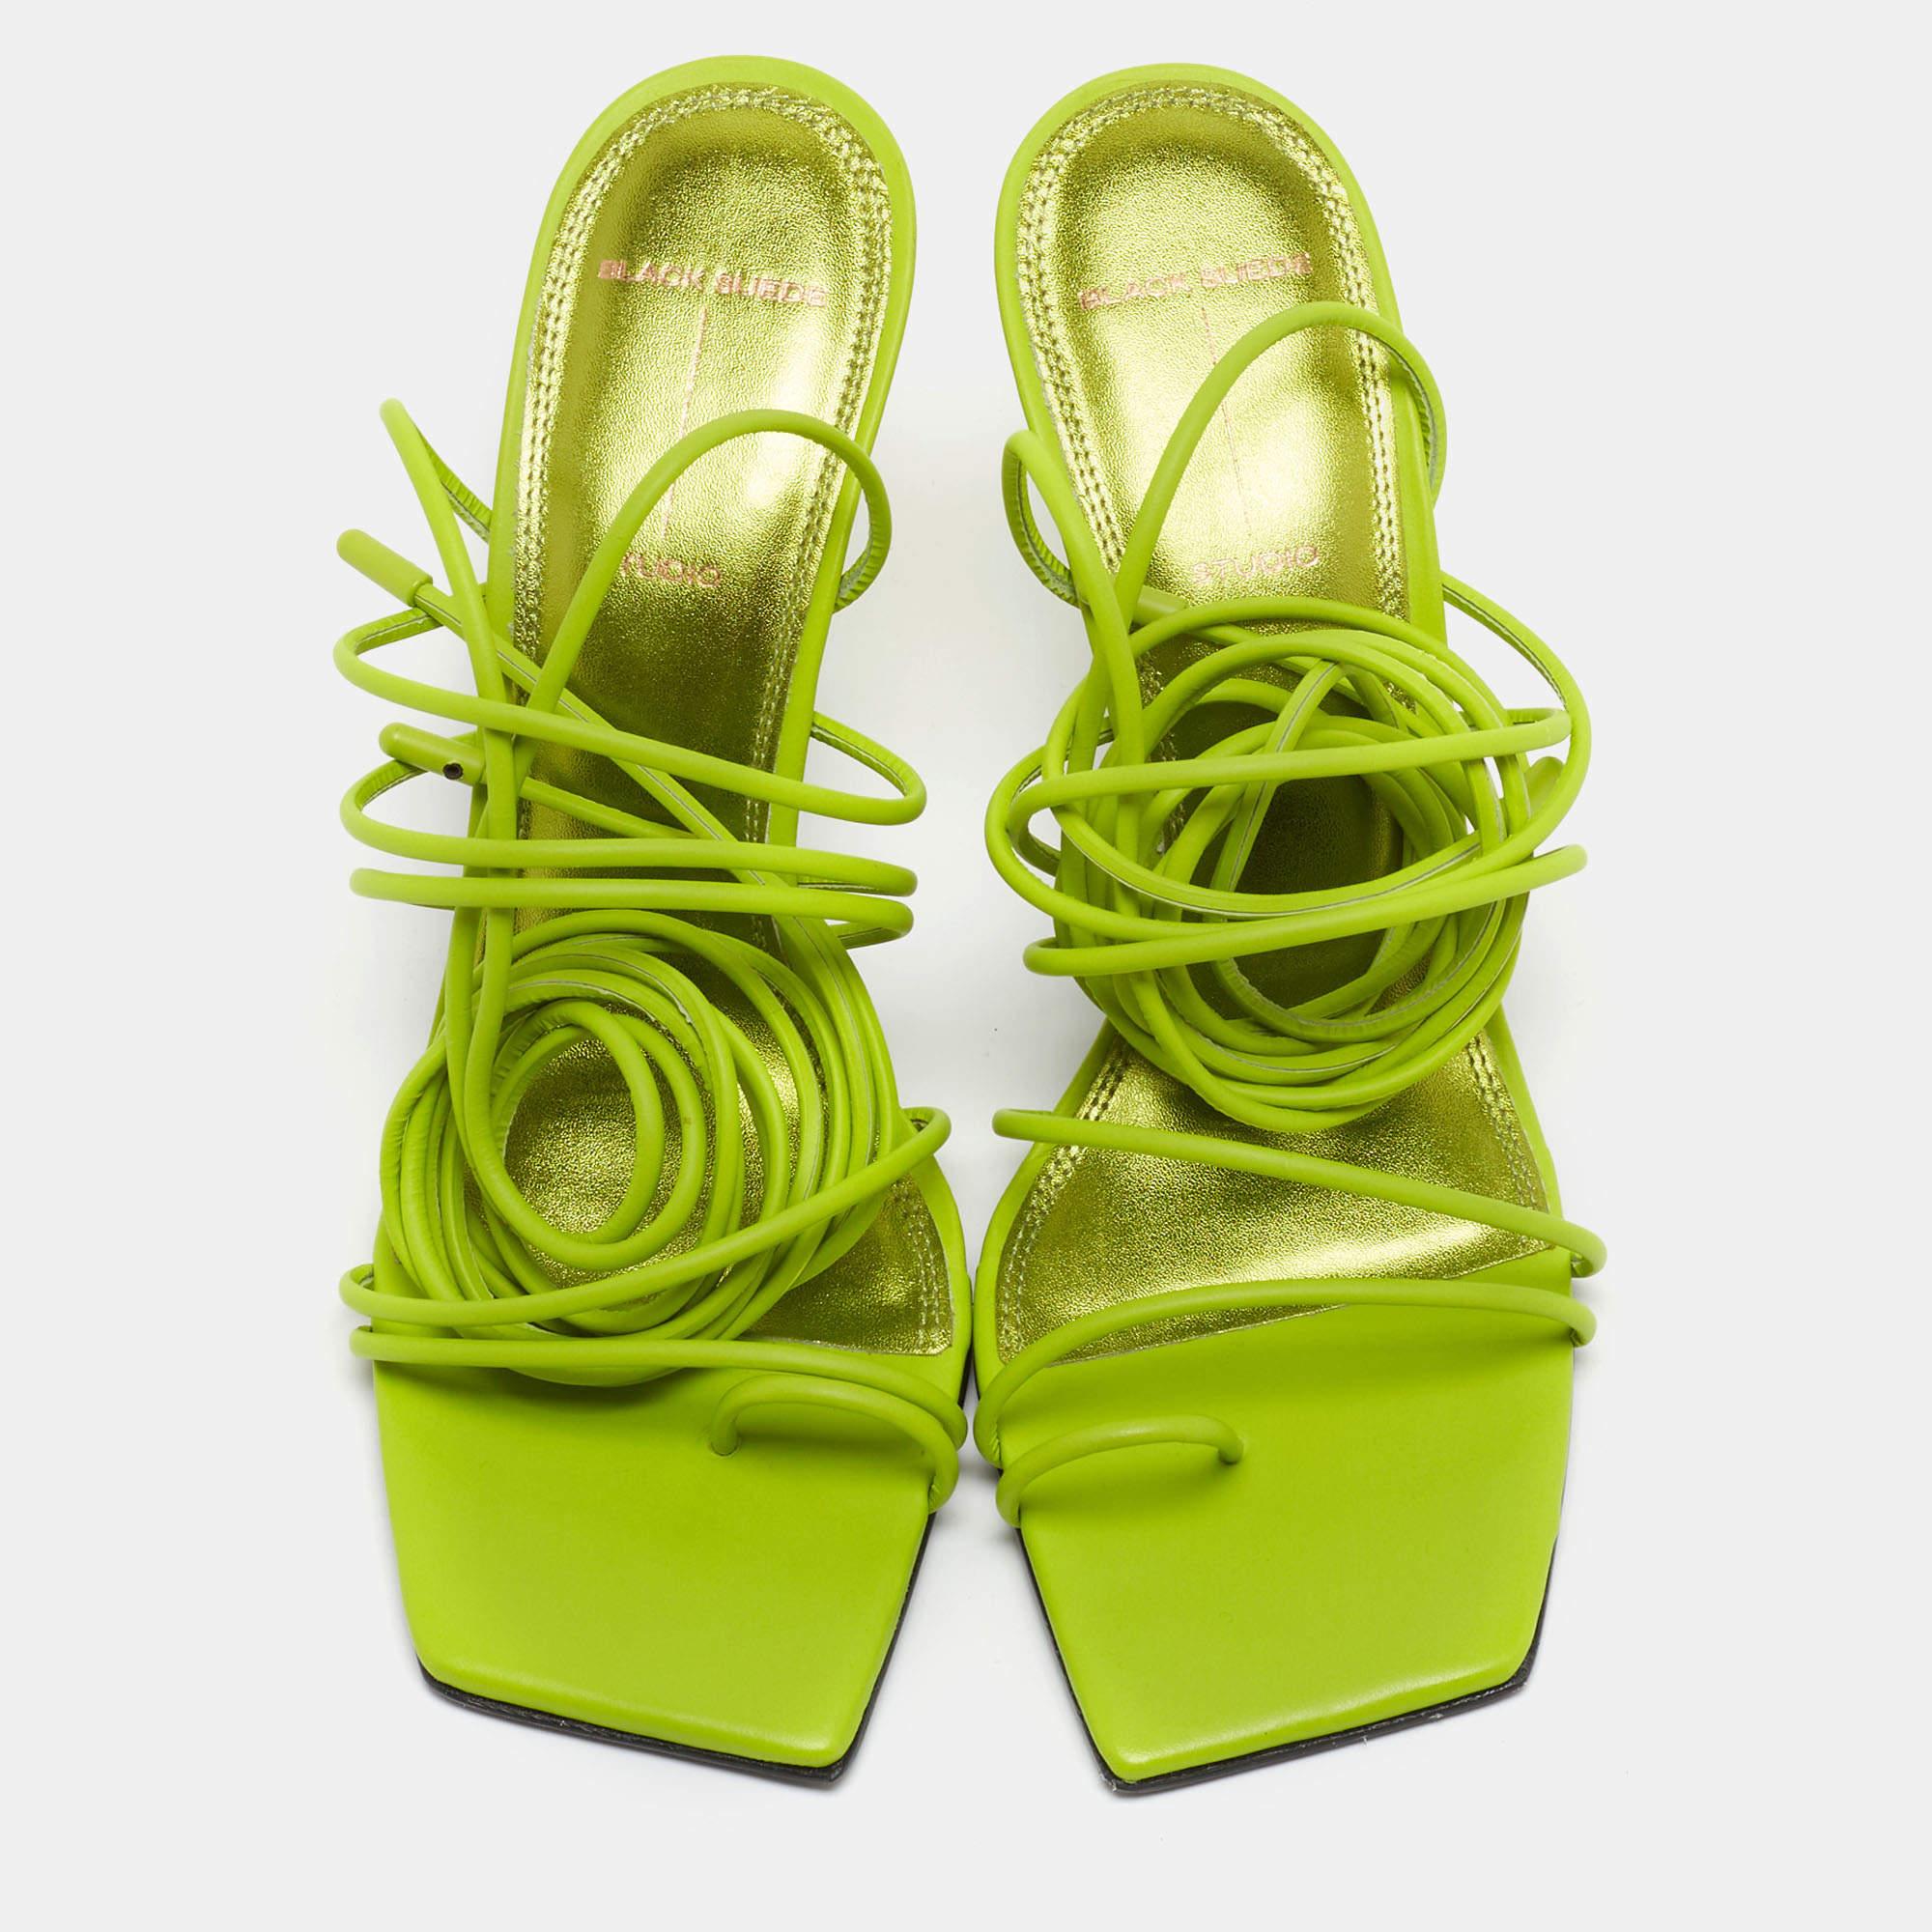 The Black Suede Studio x Caroline sandals are a perfect blend of elegance and comfort. Crafted by the collaboration between Black Suede Studio and Caroline Stanbury, these sandals feature luxurious green leather, a stylish ankle wrap design, and a